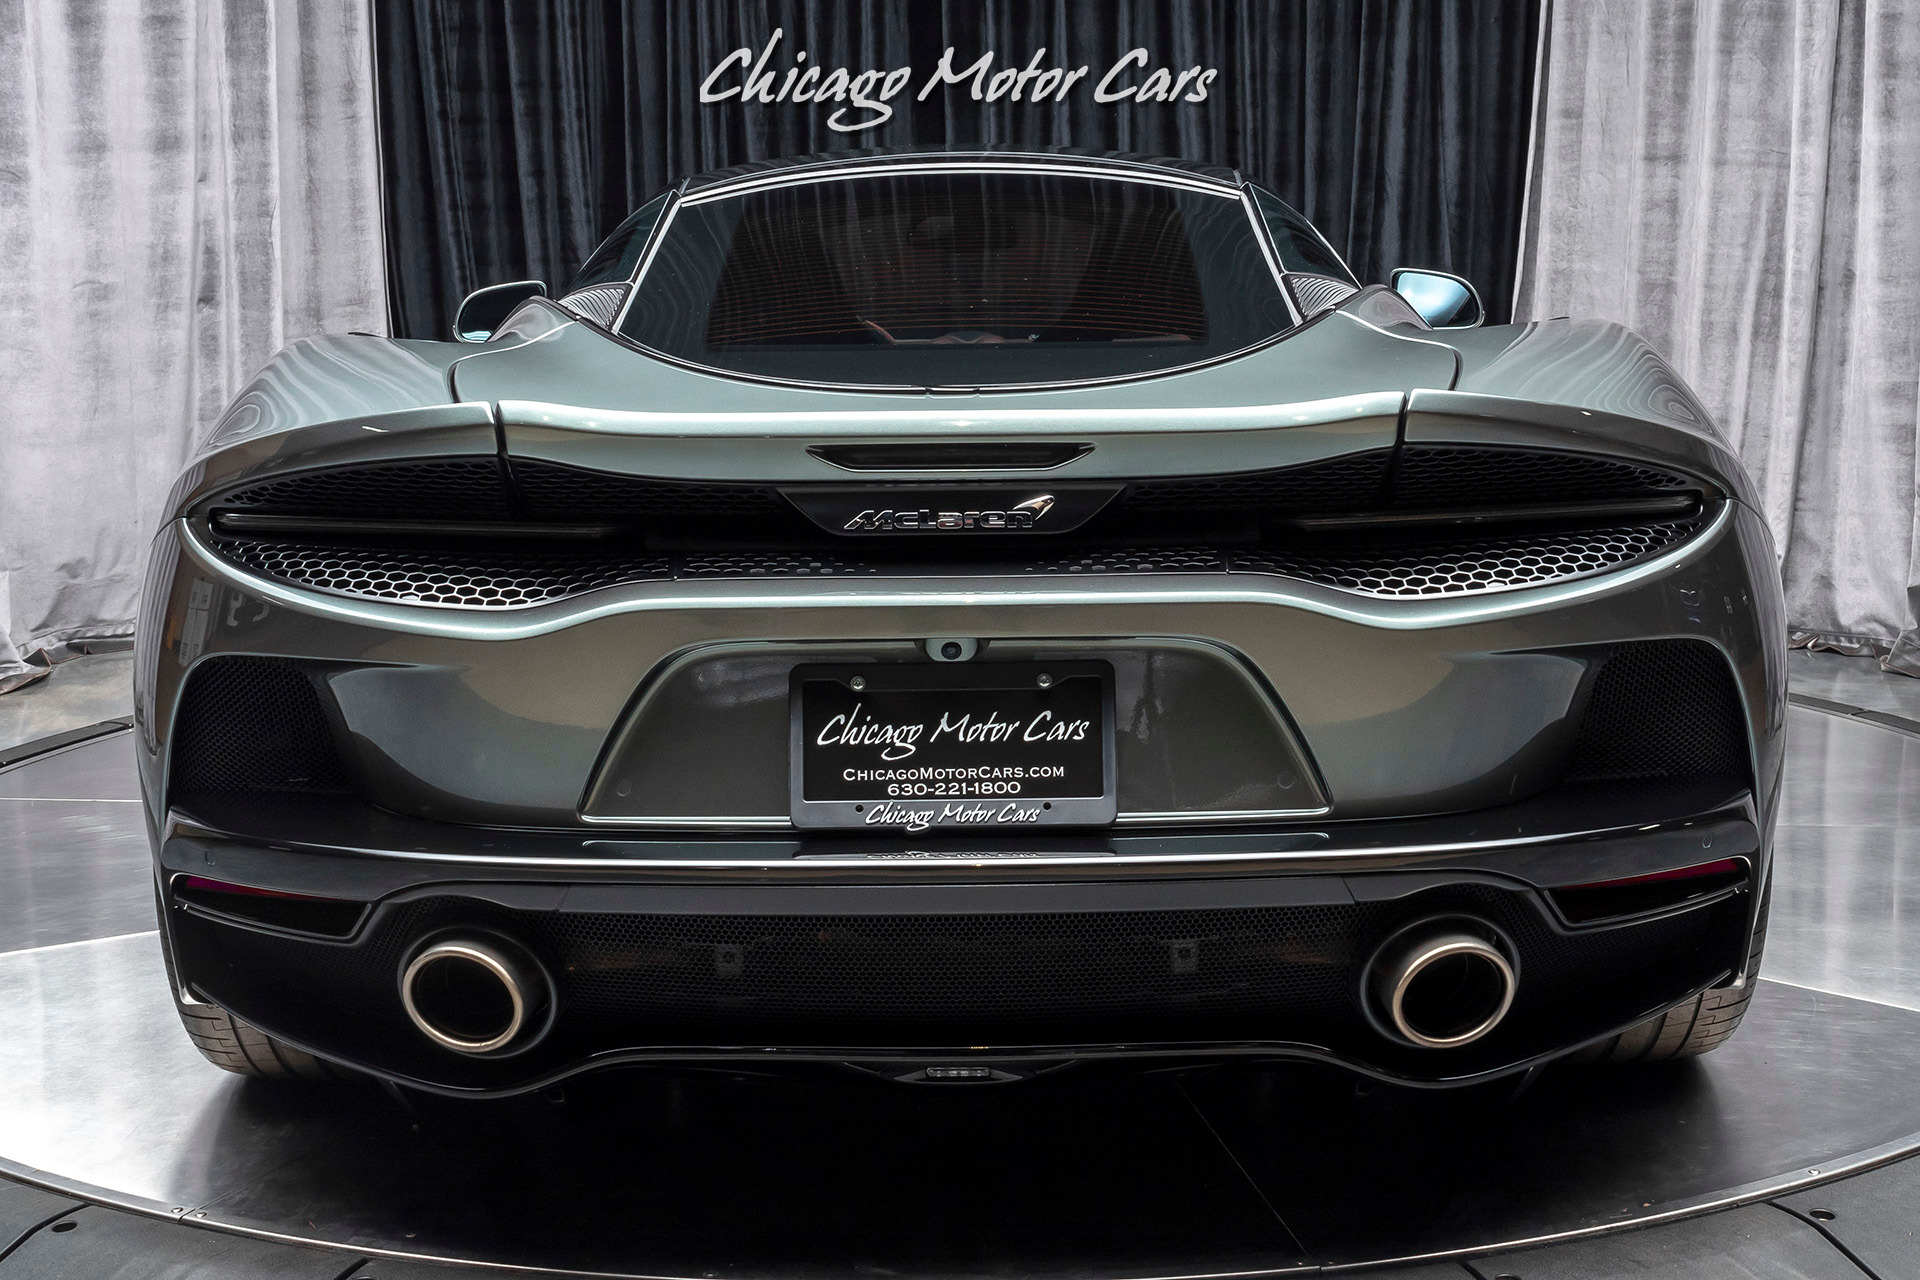 Used-2020-McLaren-GT-Pioneer-Coupe-MSRP-253125-PREMIUM-PACK-ONLY-500-MILES